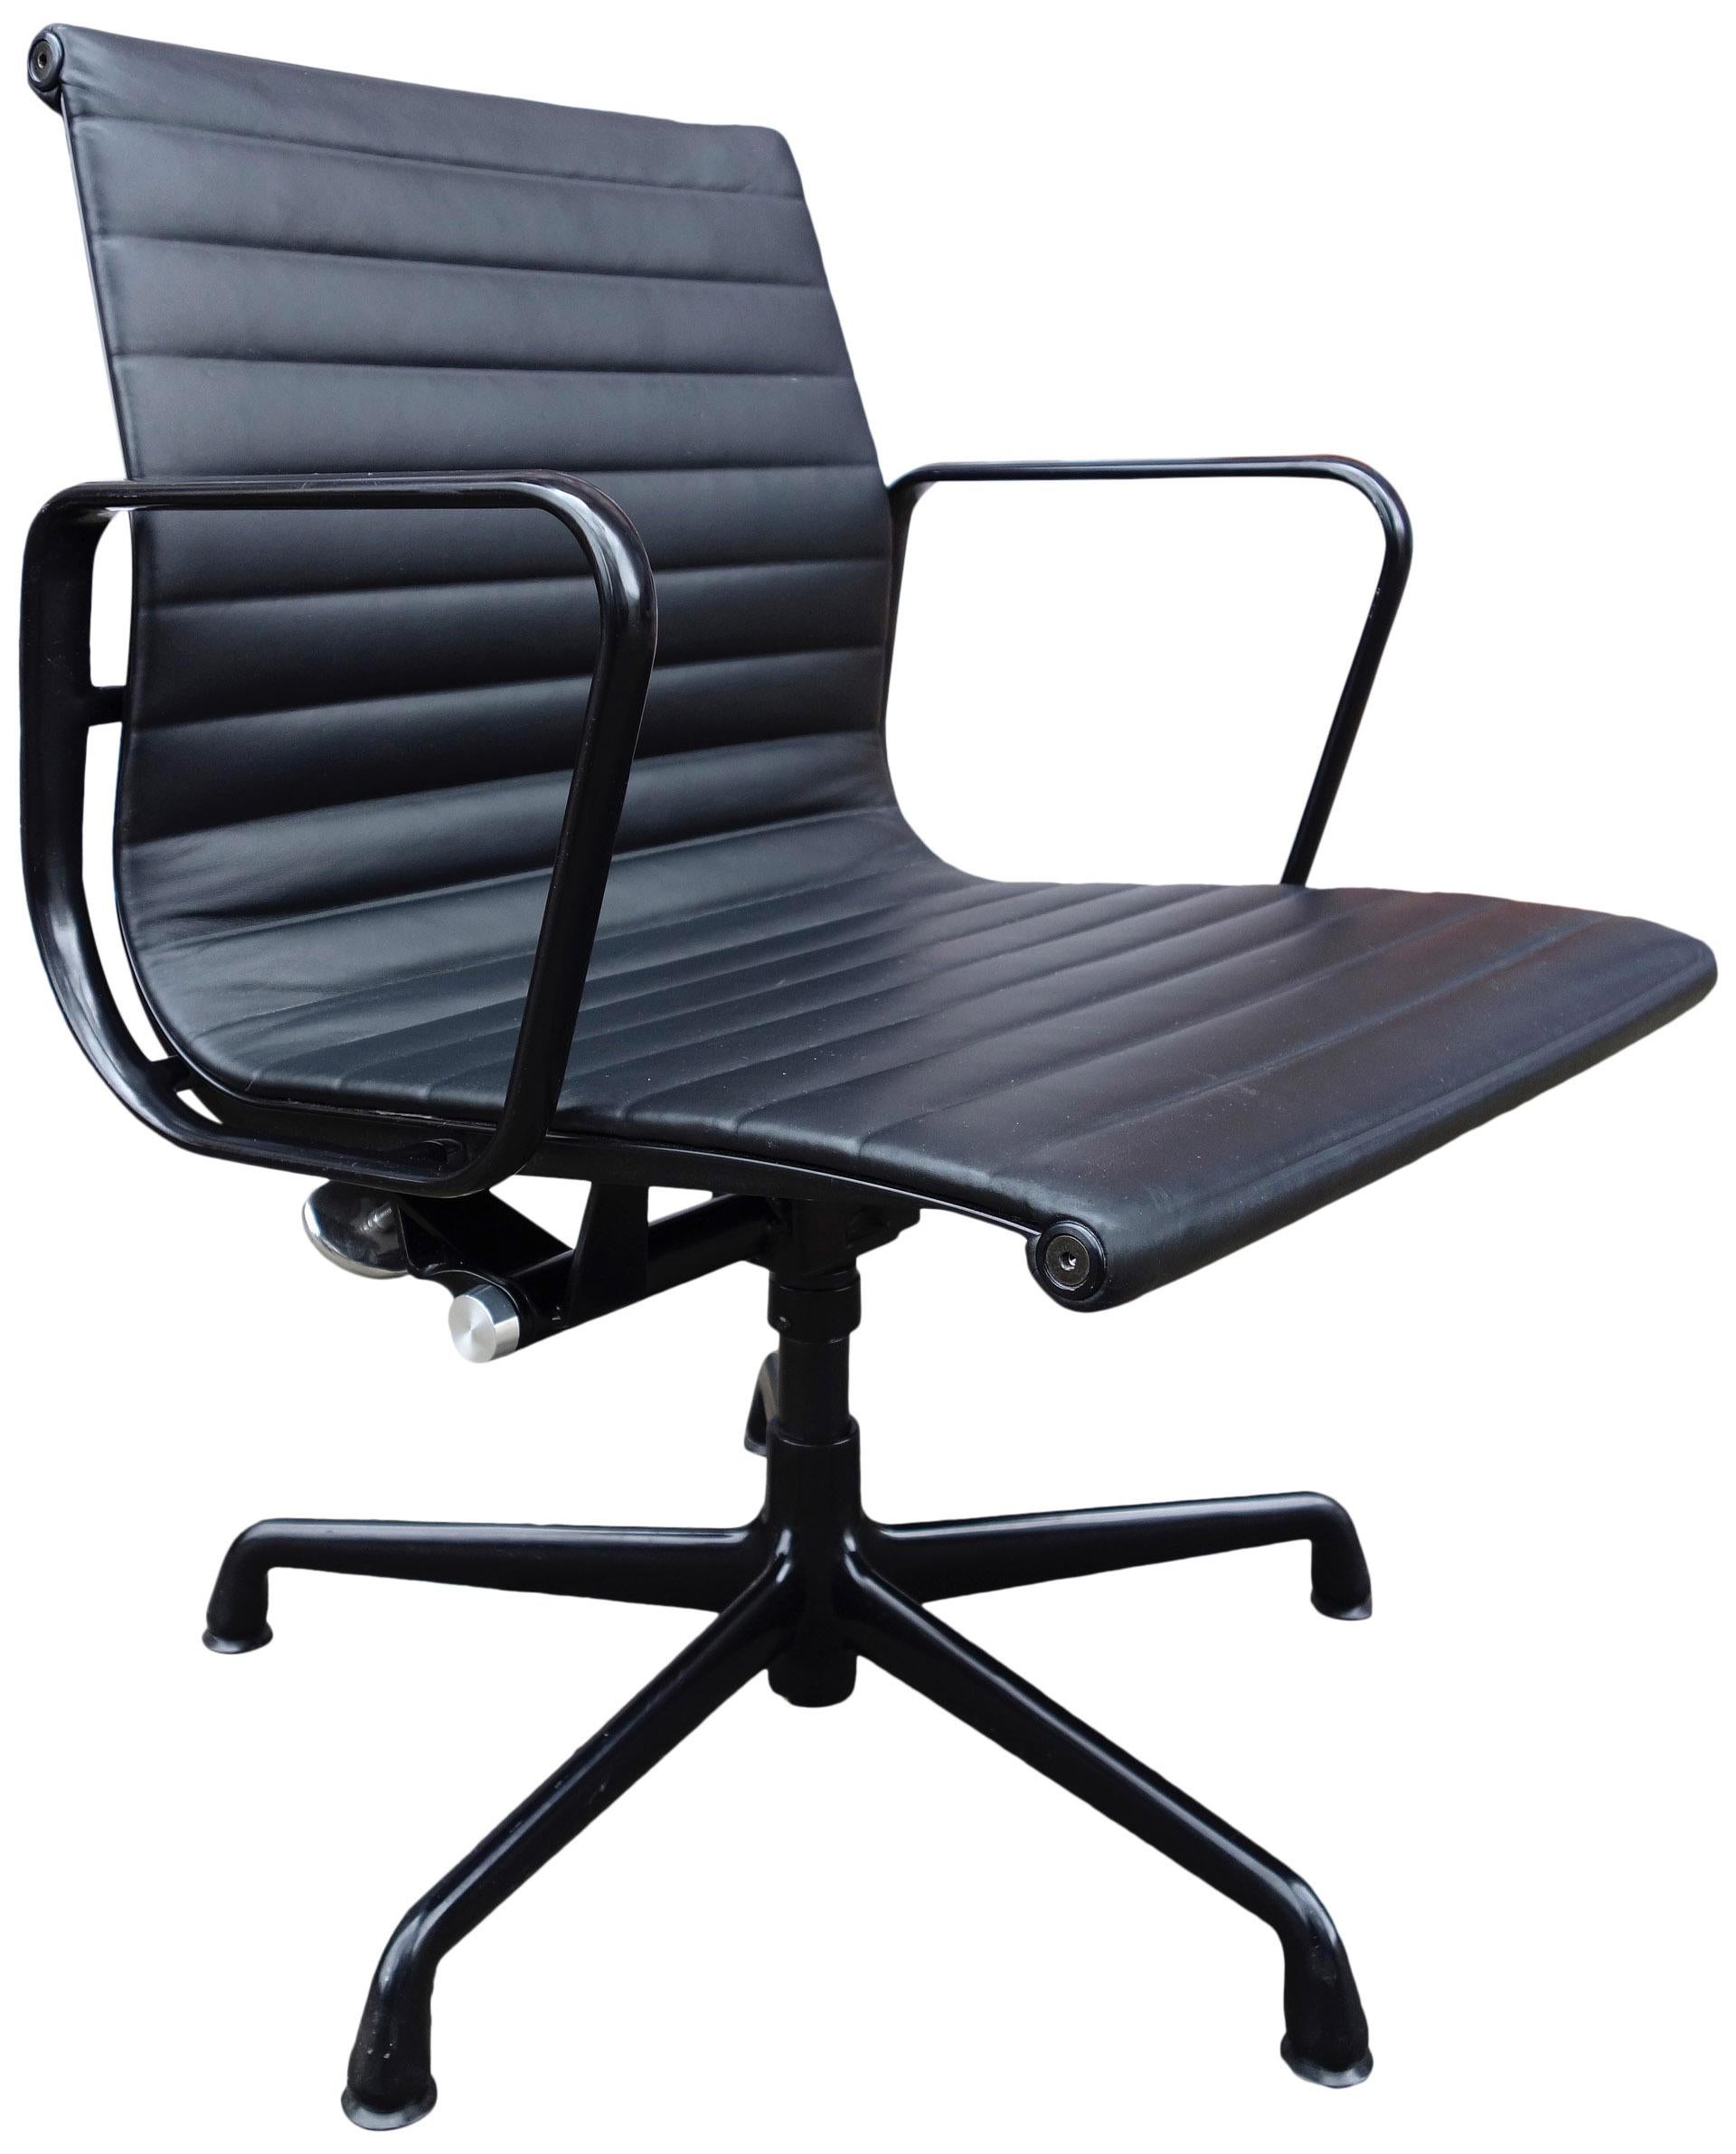 American Stunning Eames Aluminum Group Chairs for Herman Miller Black on Black